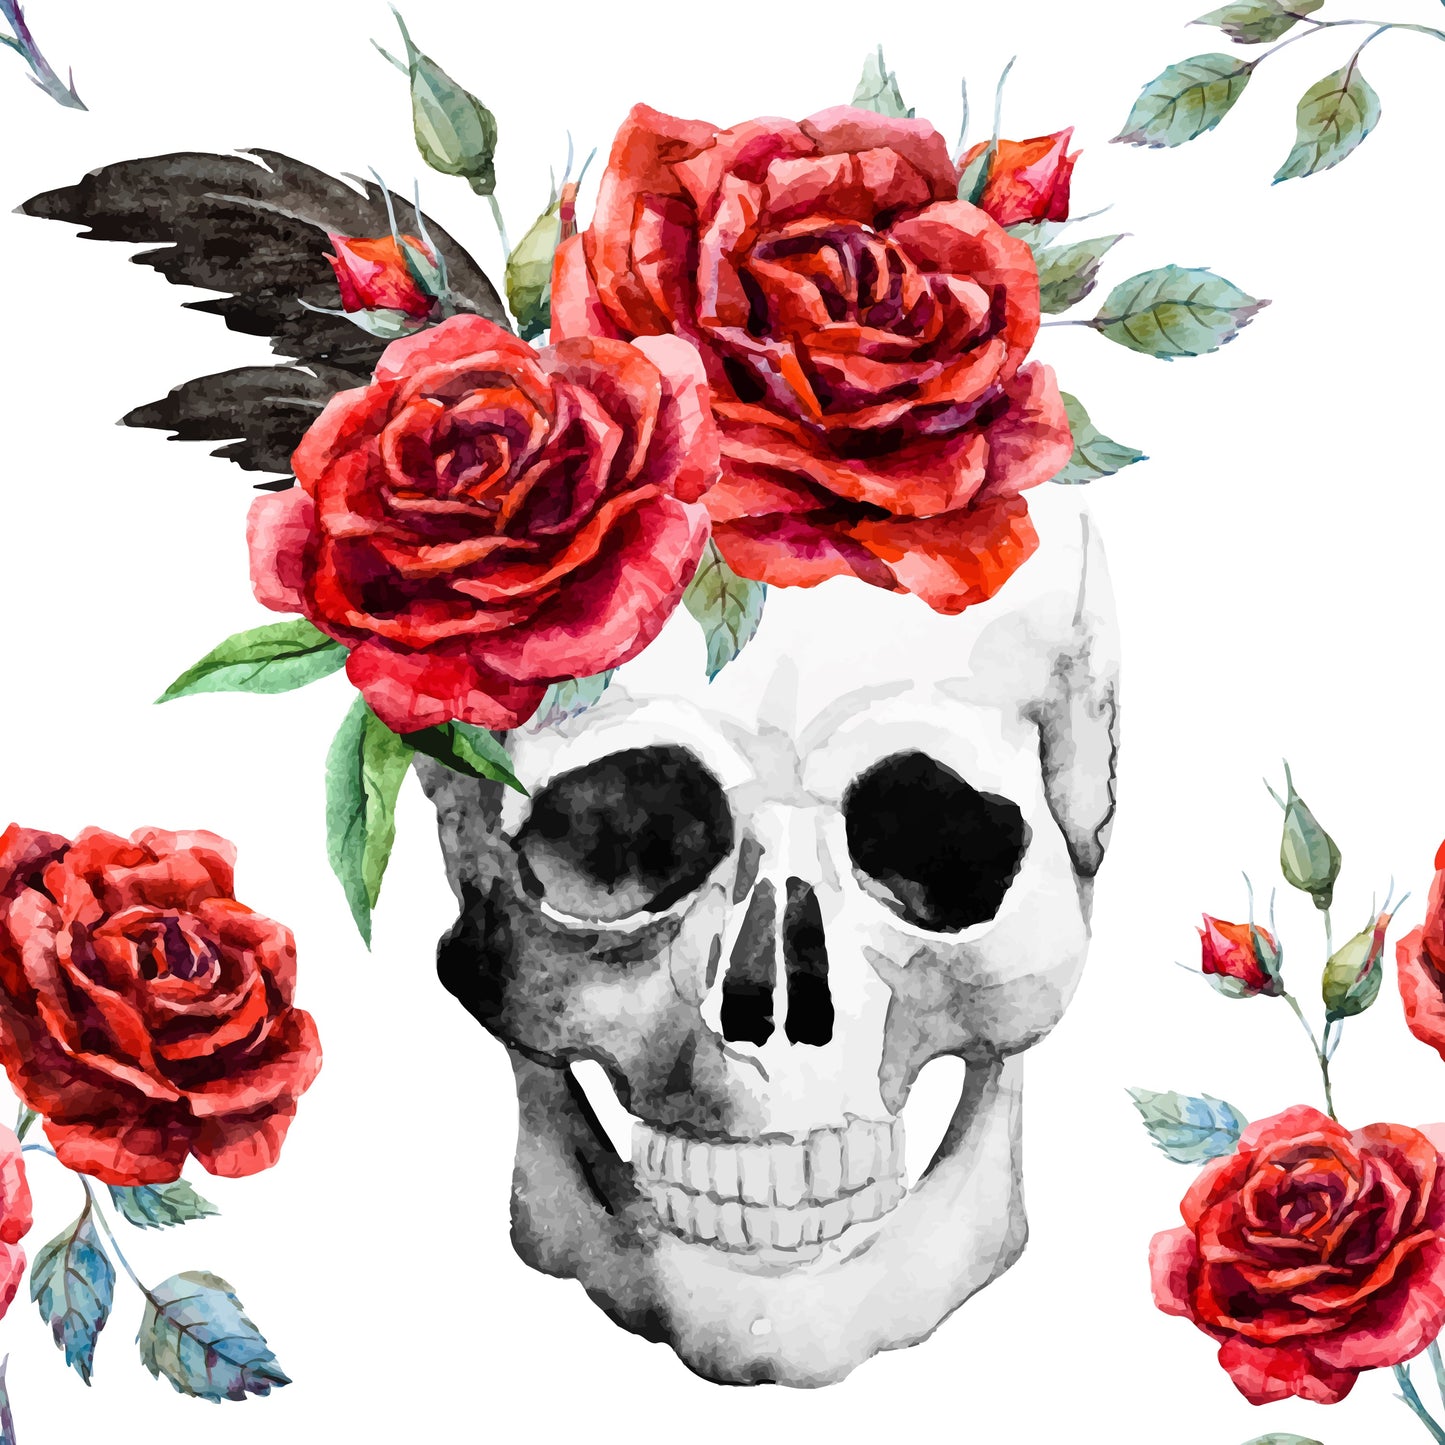 Skulls with Red Rose Hats (Tattoo Style) (Adhesive Vinyl - 12" x 12" Printed Sheet)